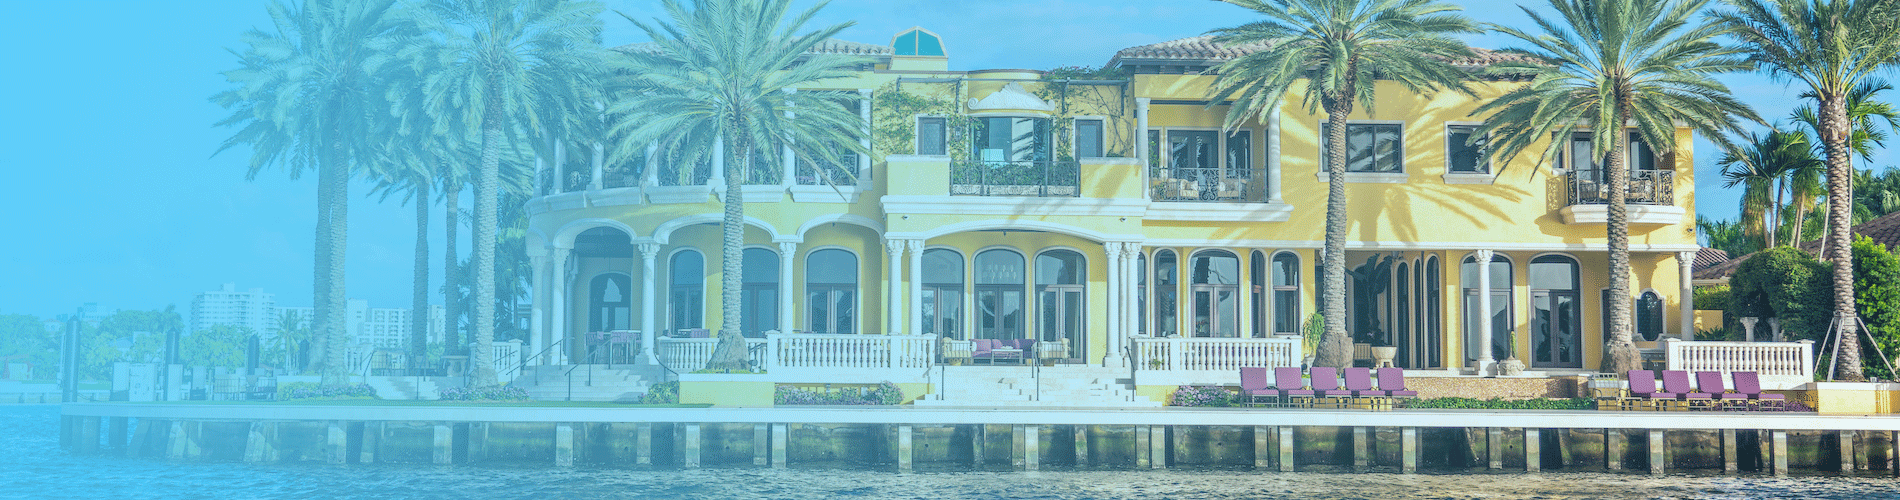 Fort Lauderdale Waterfront Home